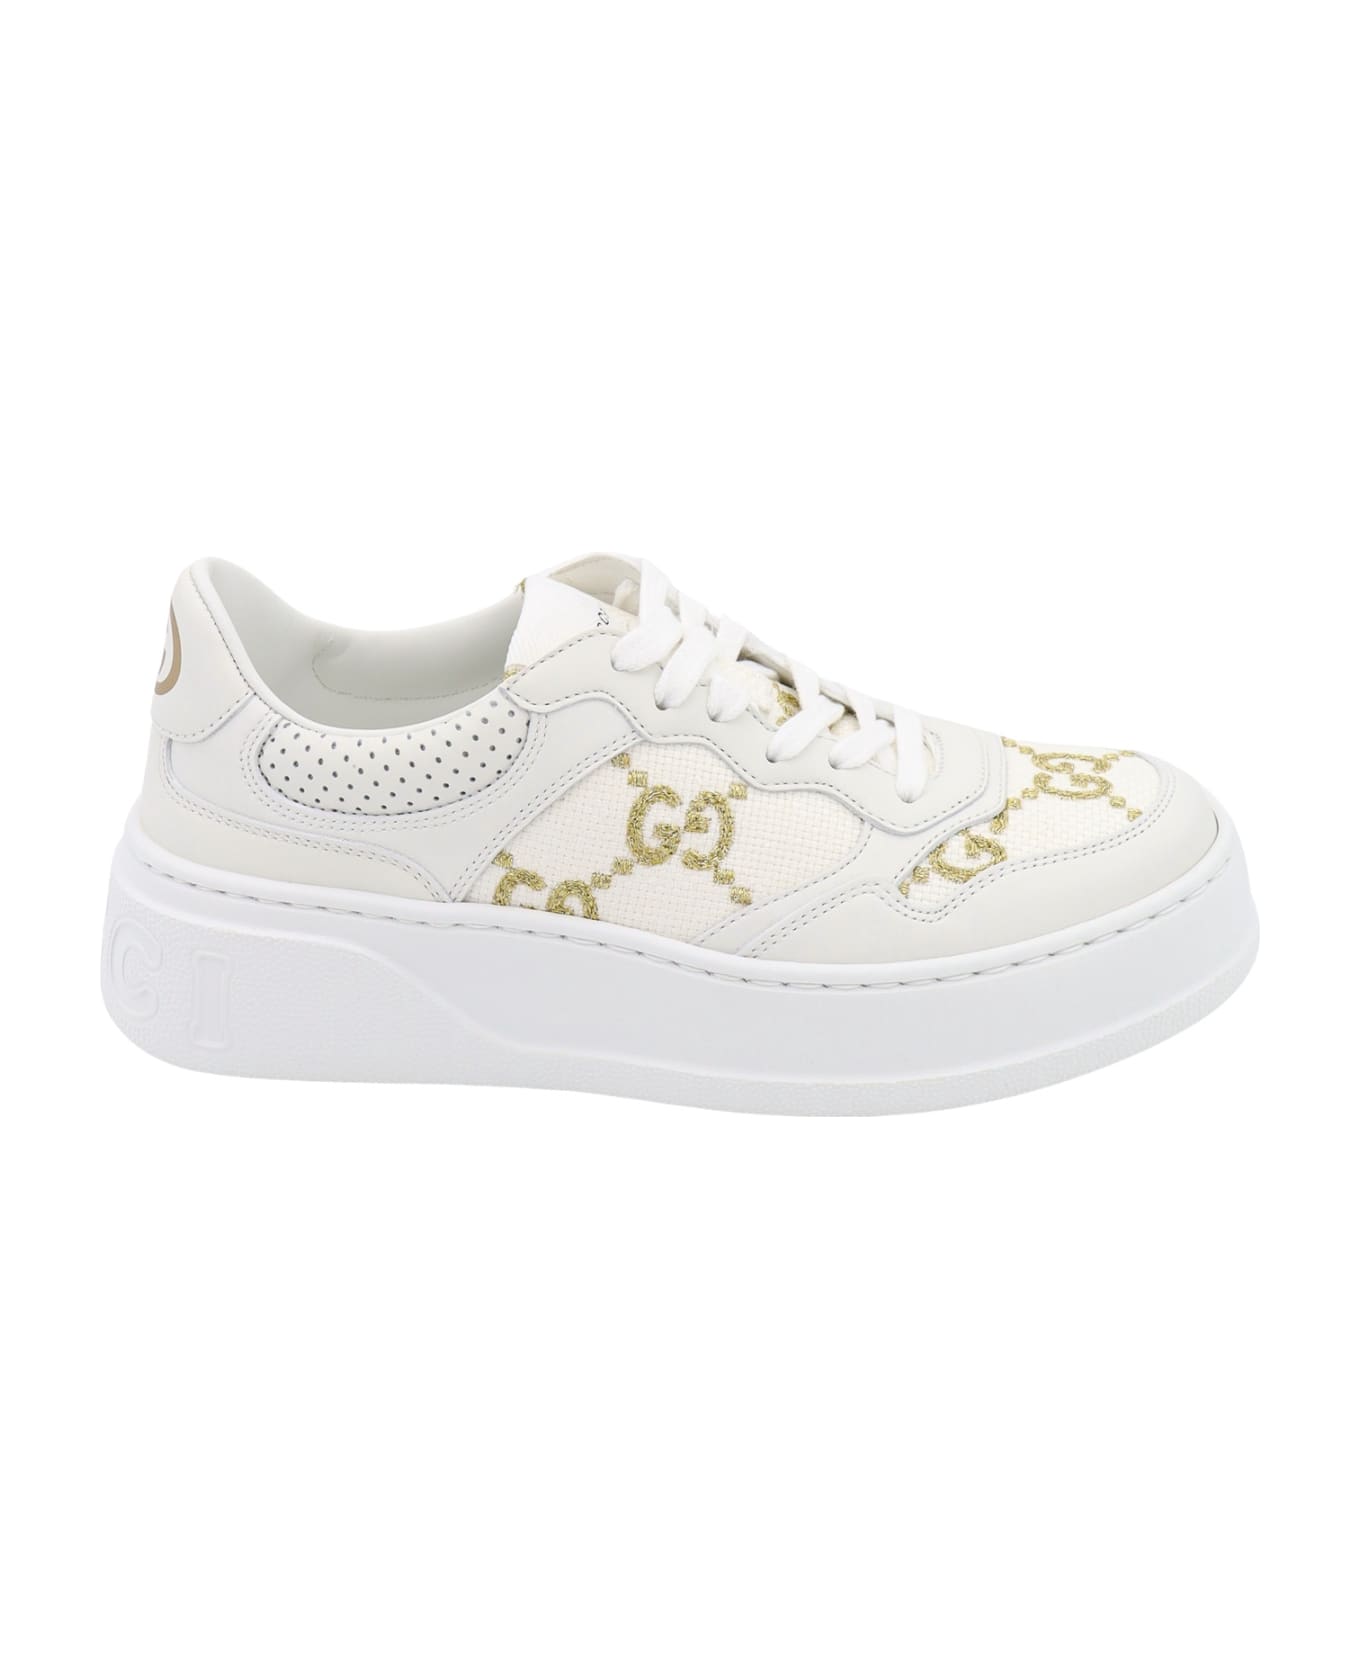 Gucci Gg Sneakers - White スニーカー